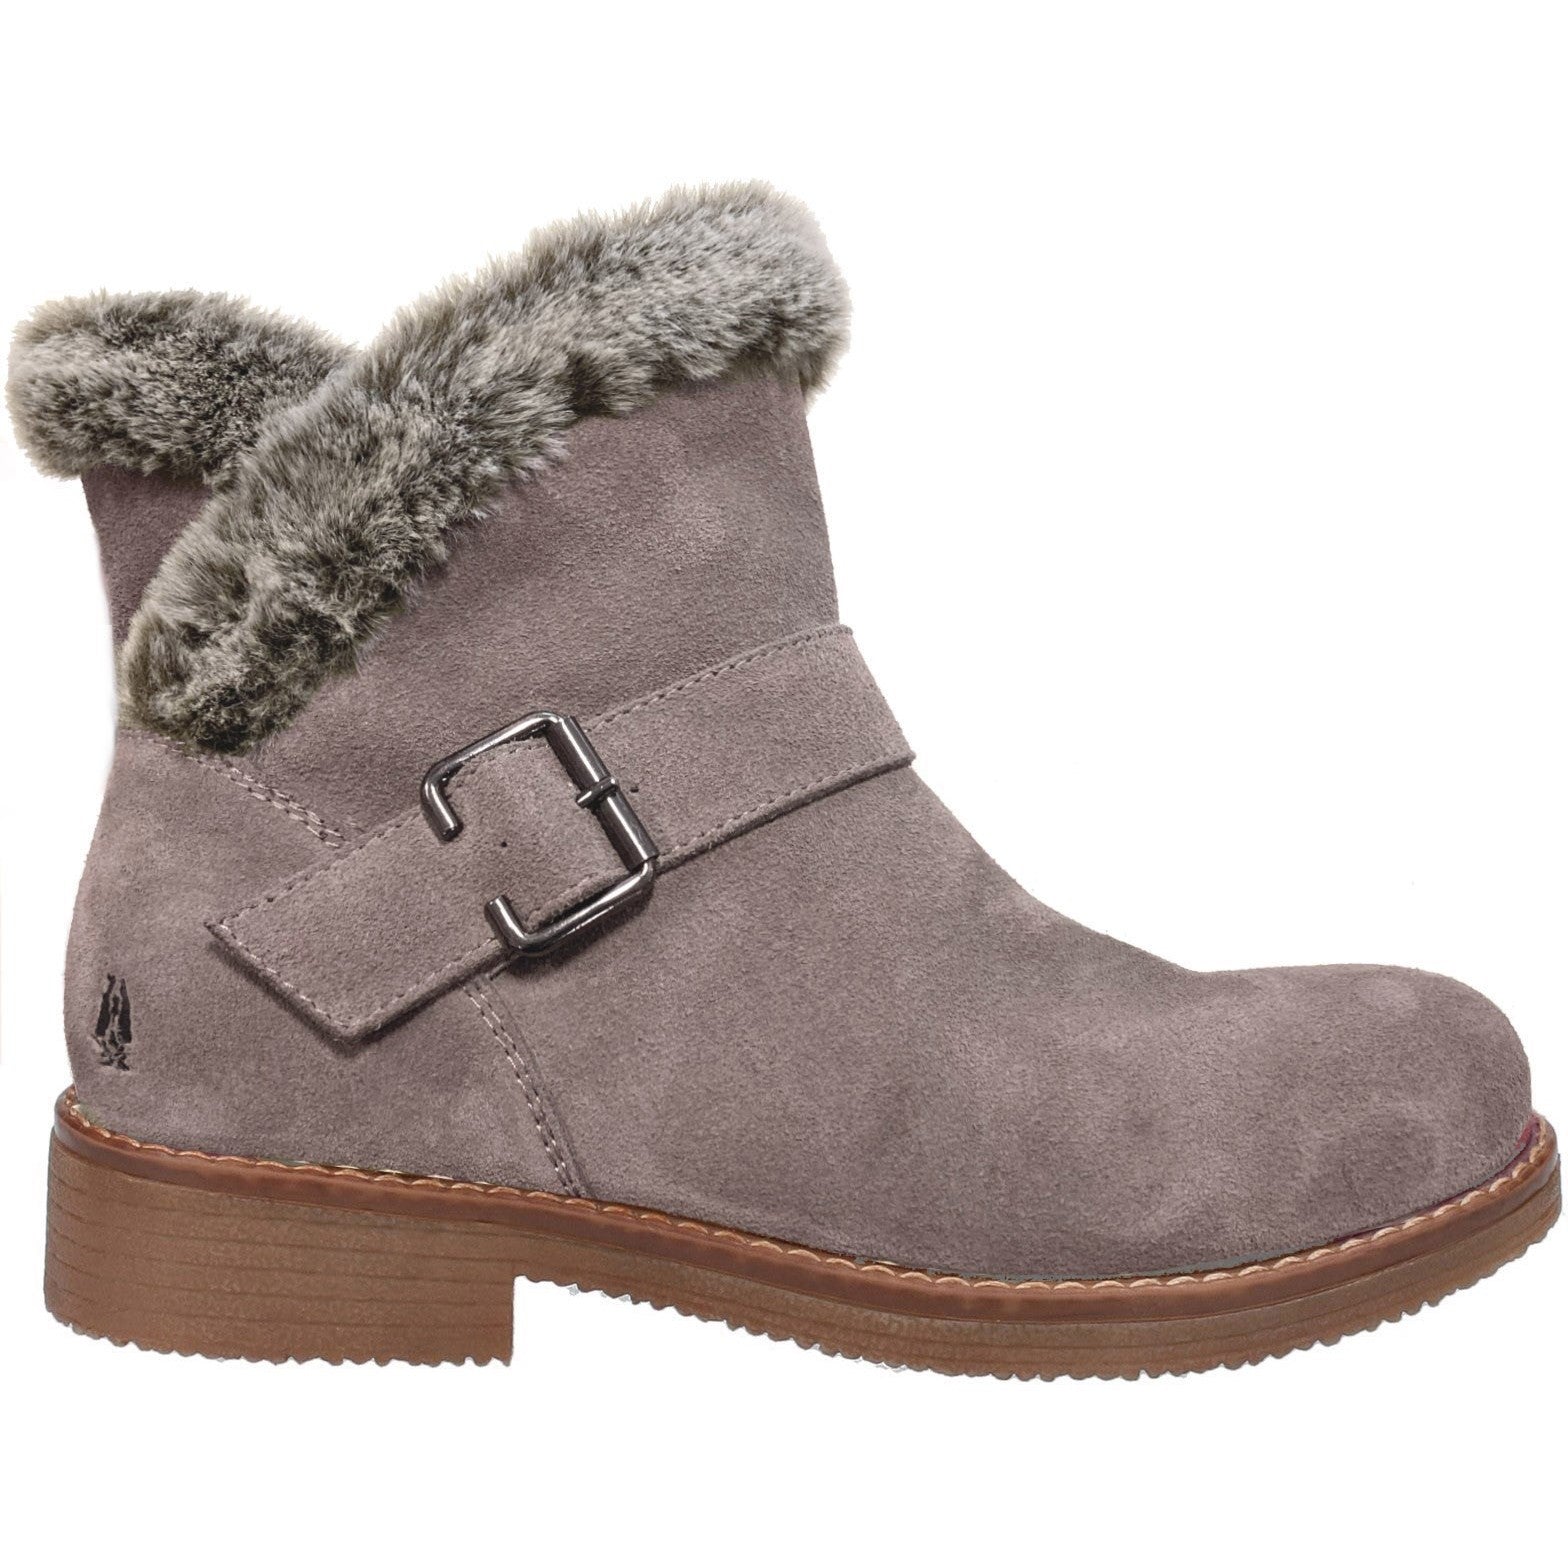 Hush Puppies Womens Hannah Suede Boot - Taupe